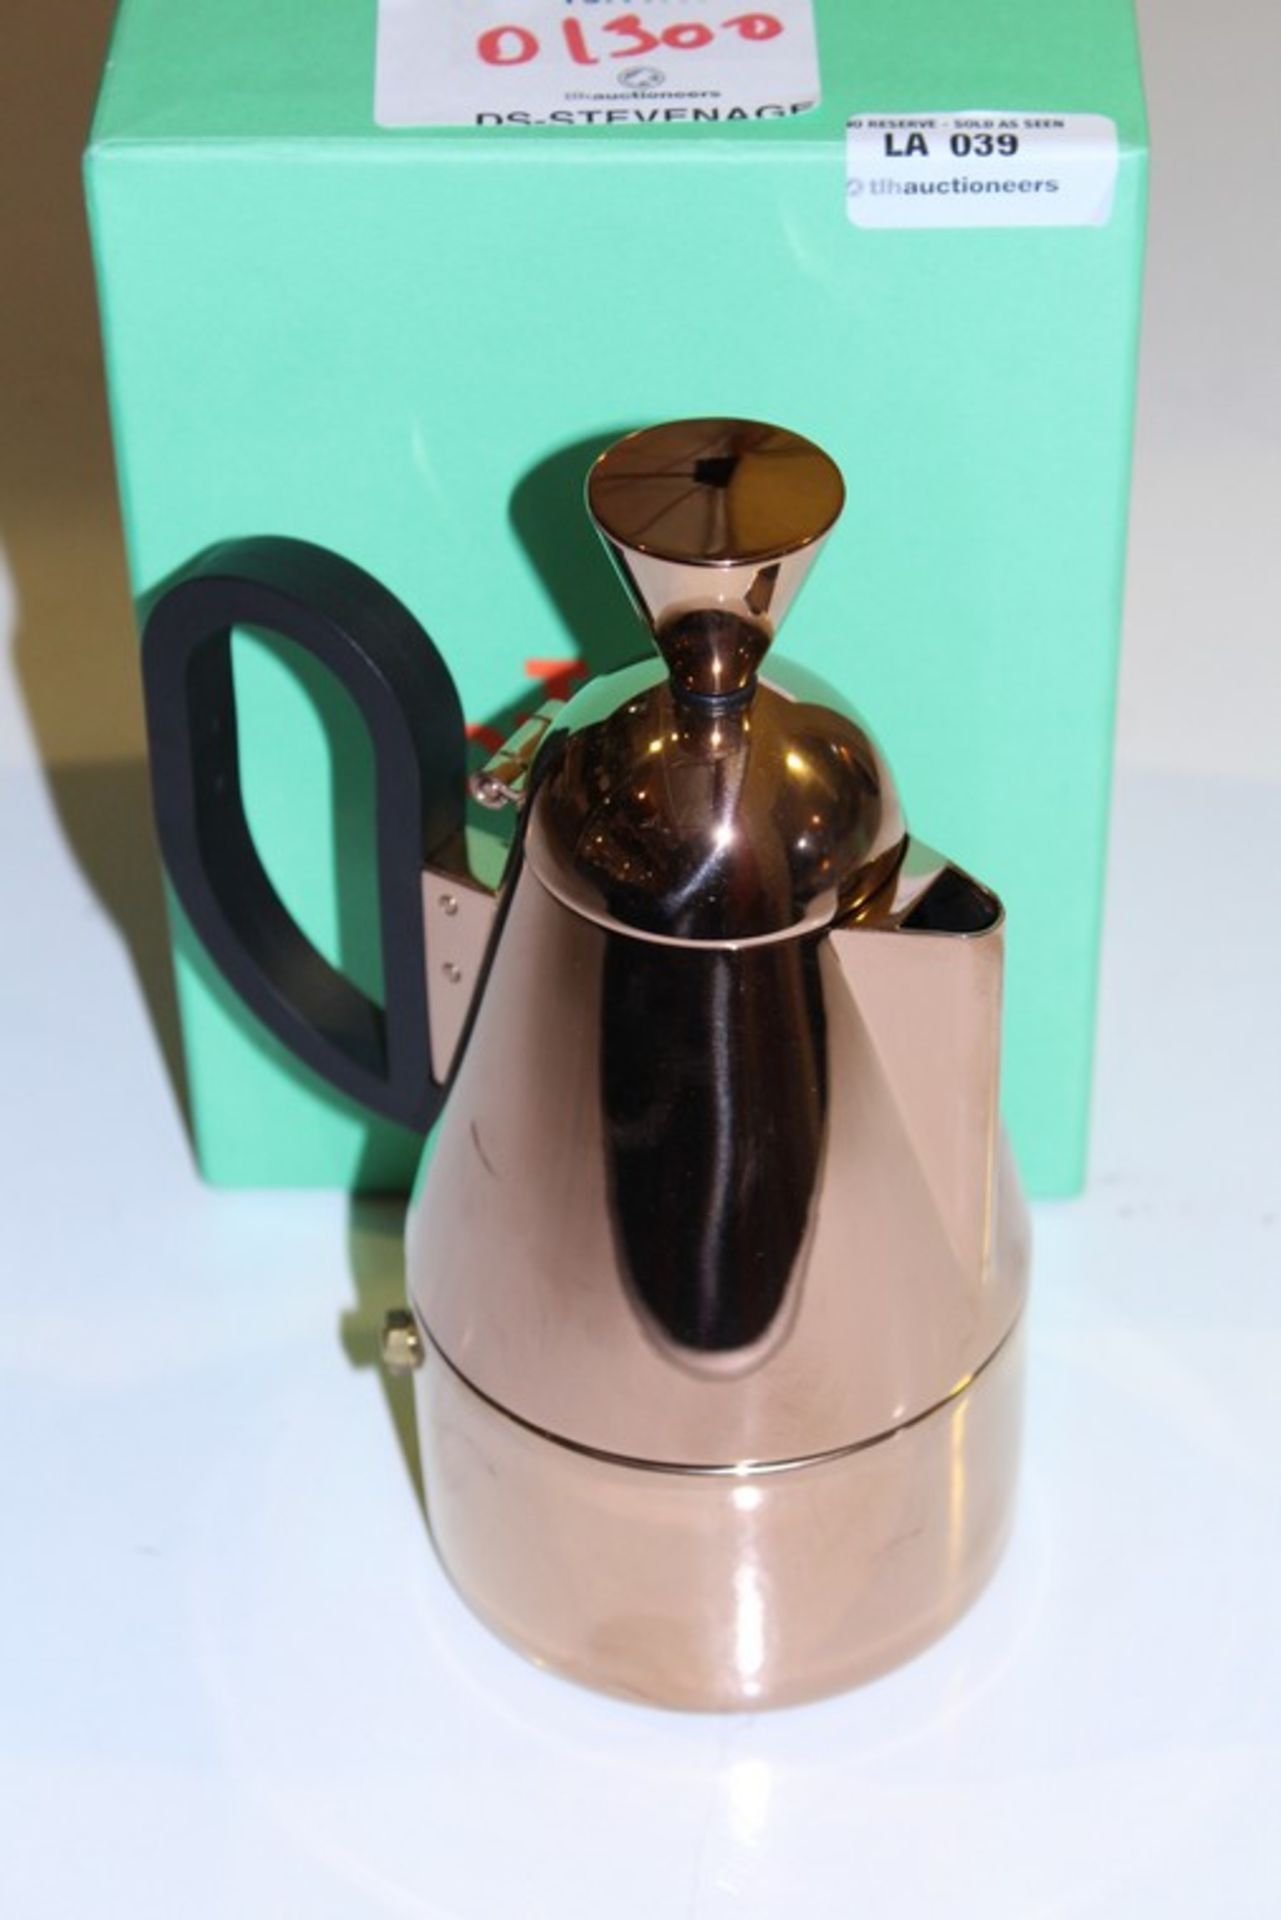 1 x BOXED TOM DIXON BRU STOCK COFFEE MAKER IN GOLD RRP £130 (16/11/17) *PLEASE NOTE THAT THE BID